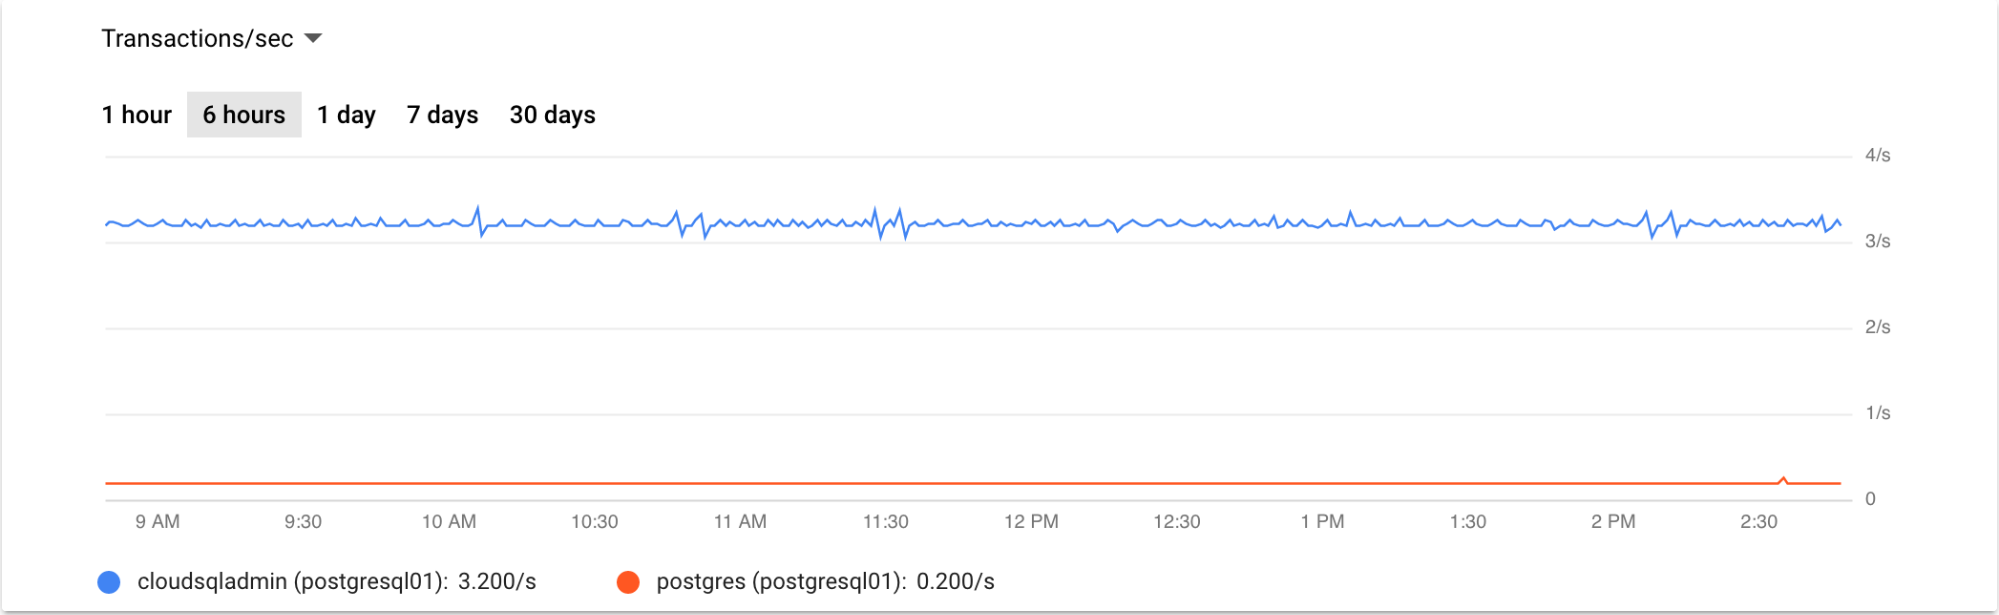 Graph of transactions per second for the
last 6 hours.